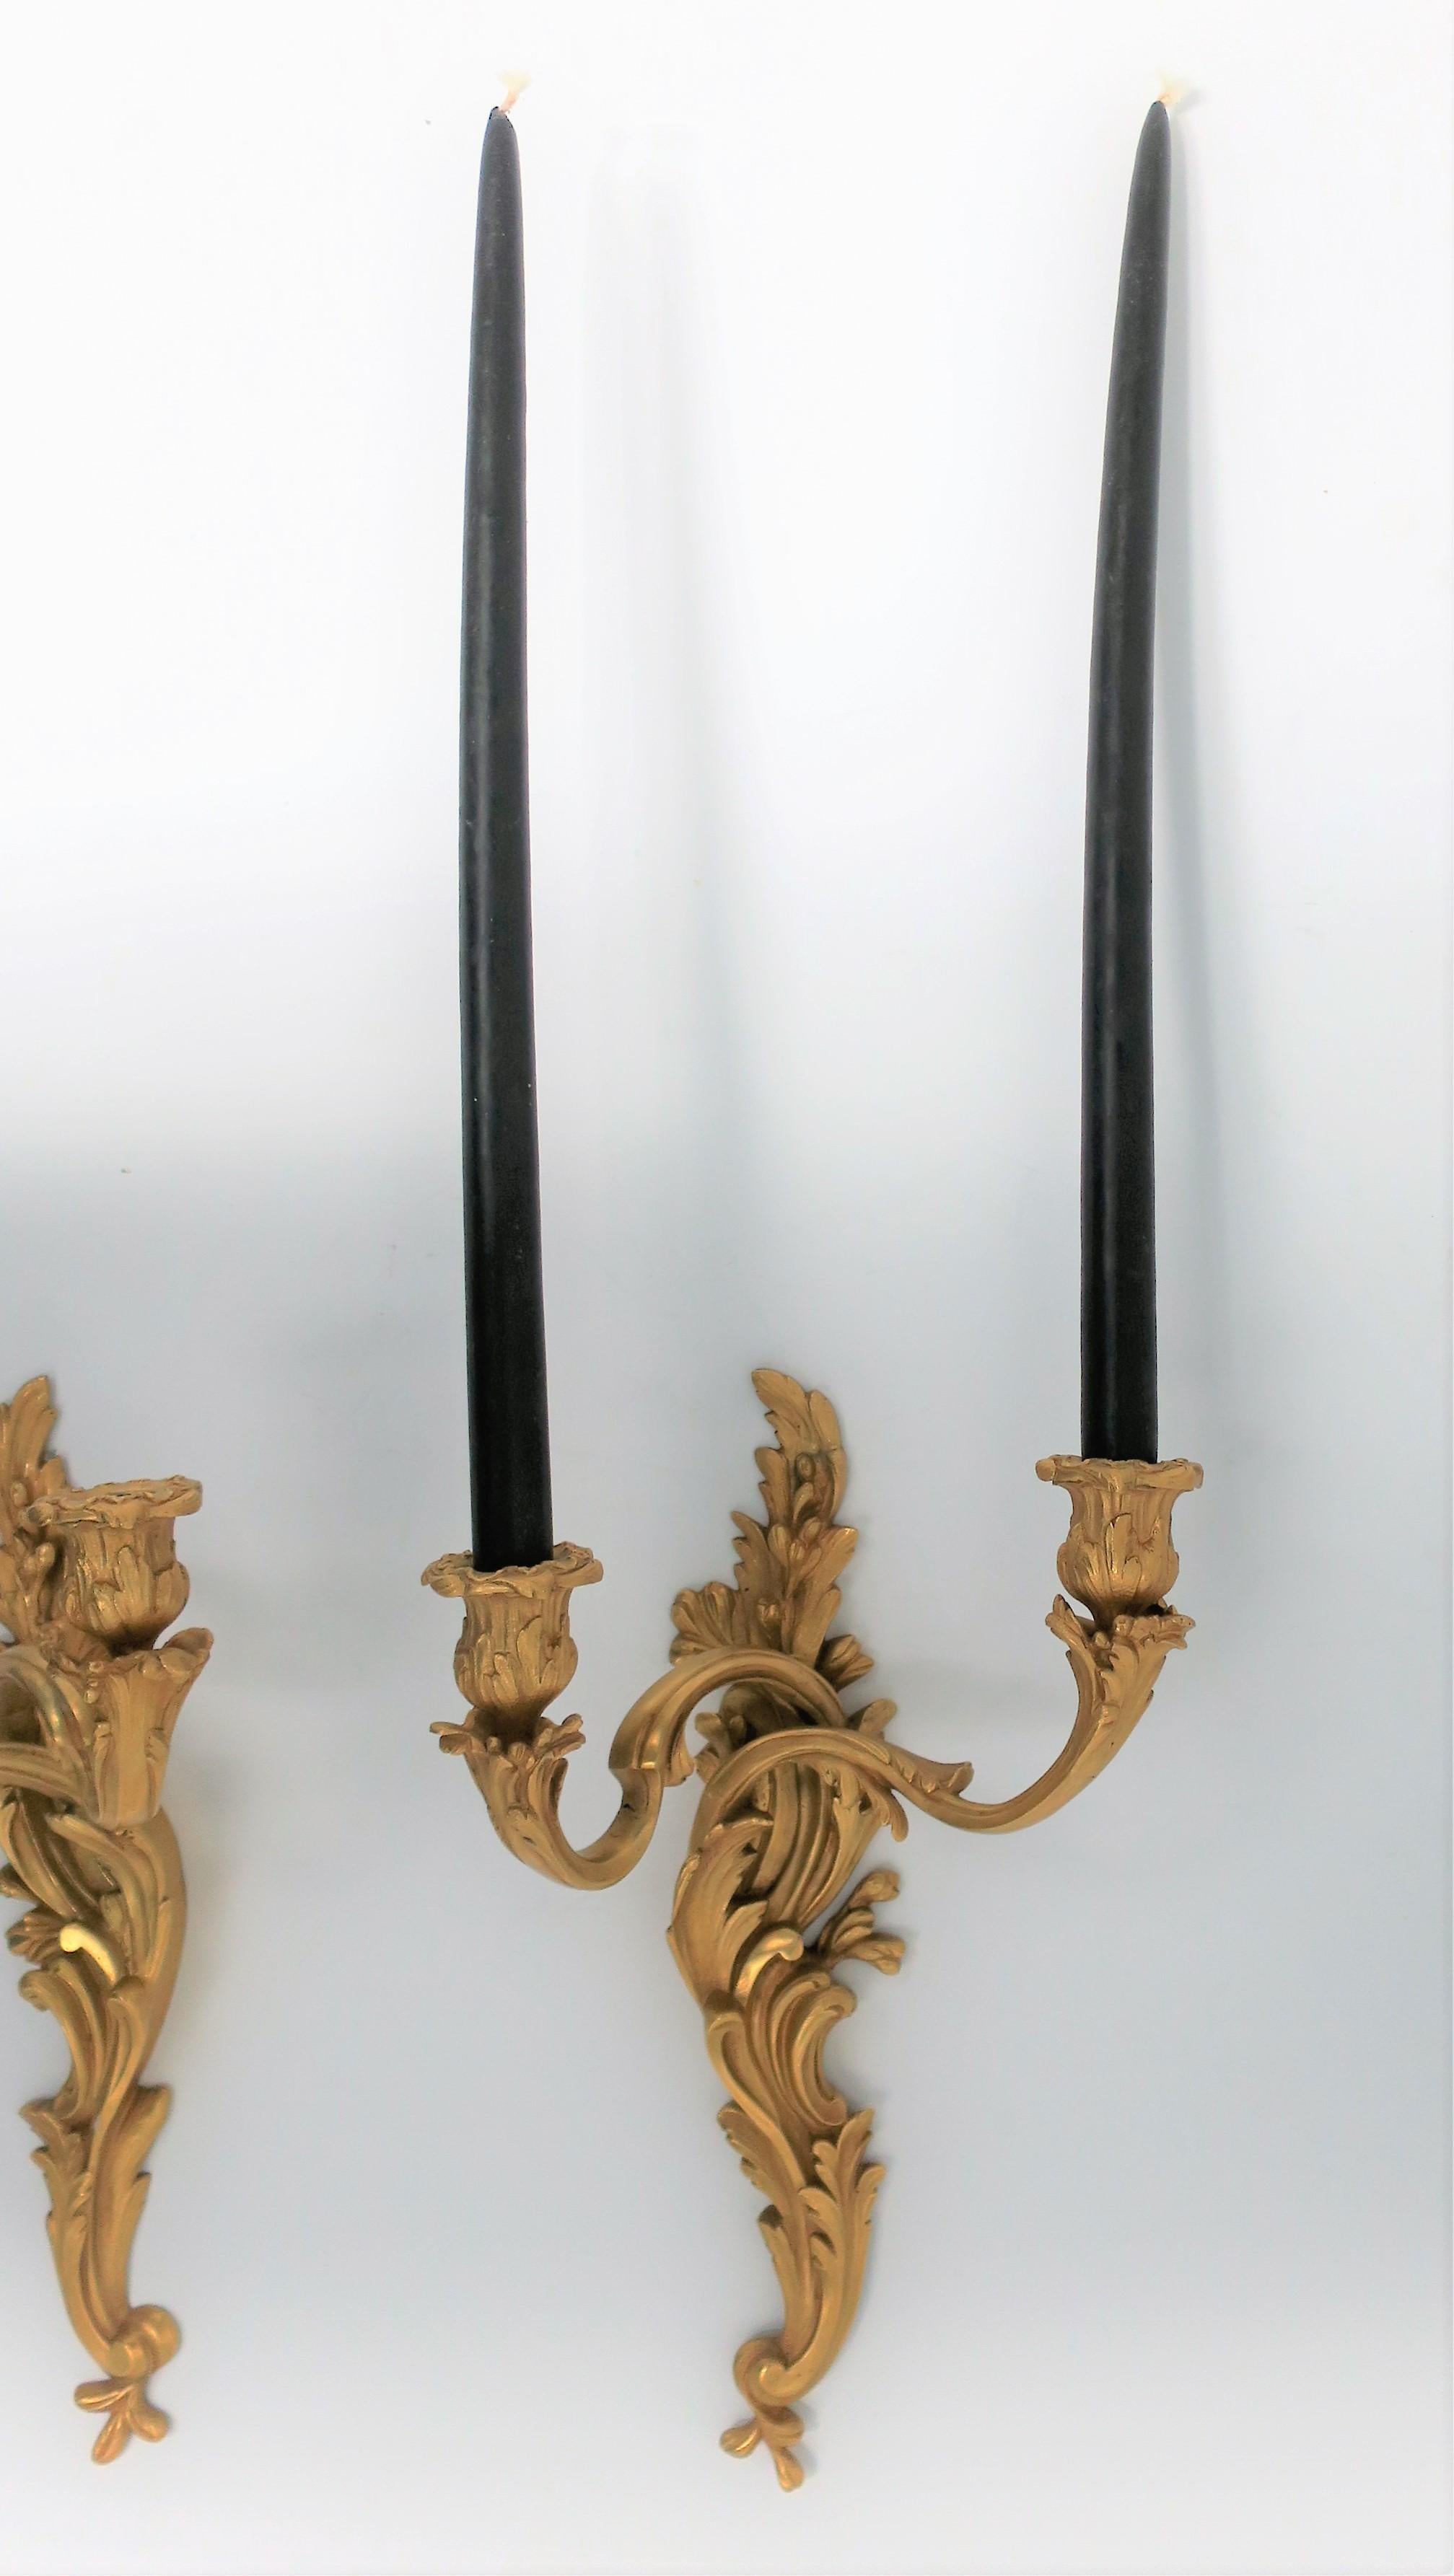 A very beautiful and substantial pair of Rococo style Dore' gold gilt bronze candlestick wall scones. 

Each sconce measures: 6